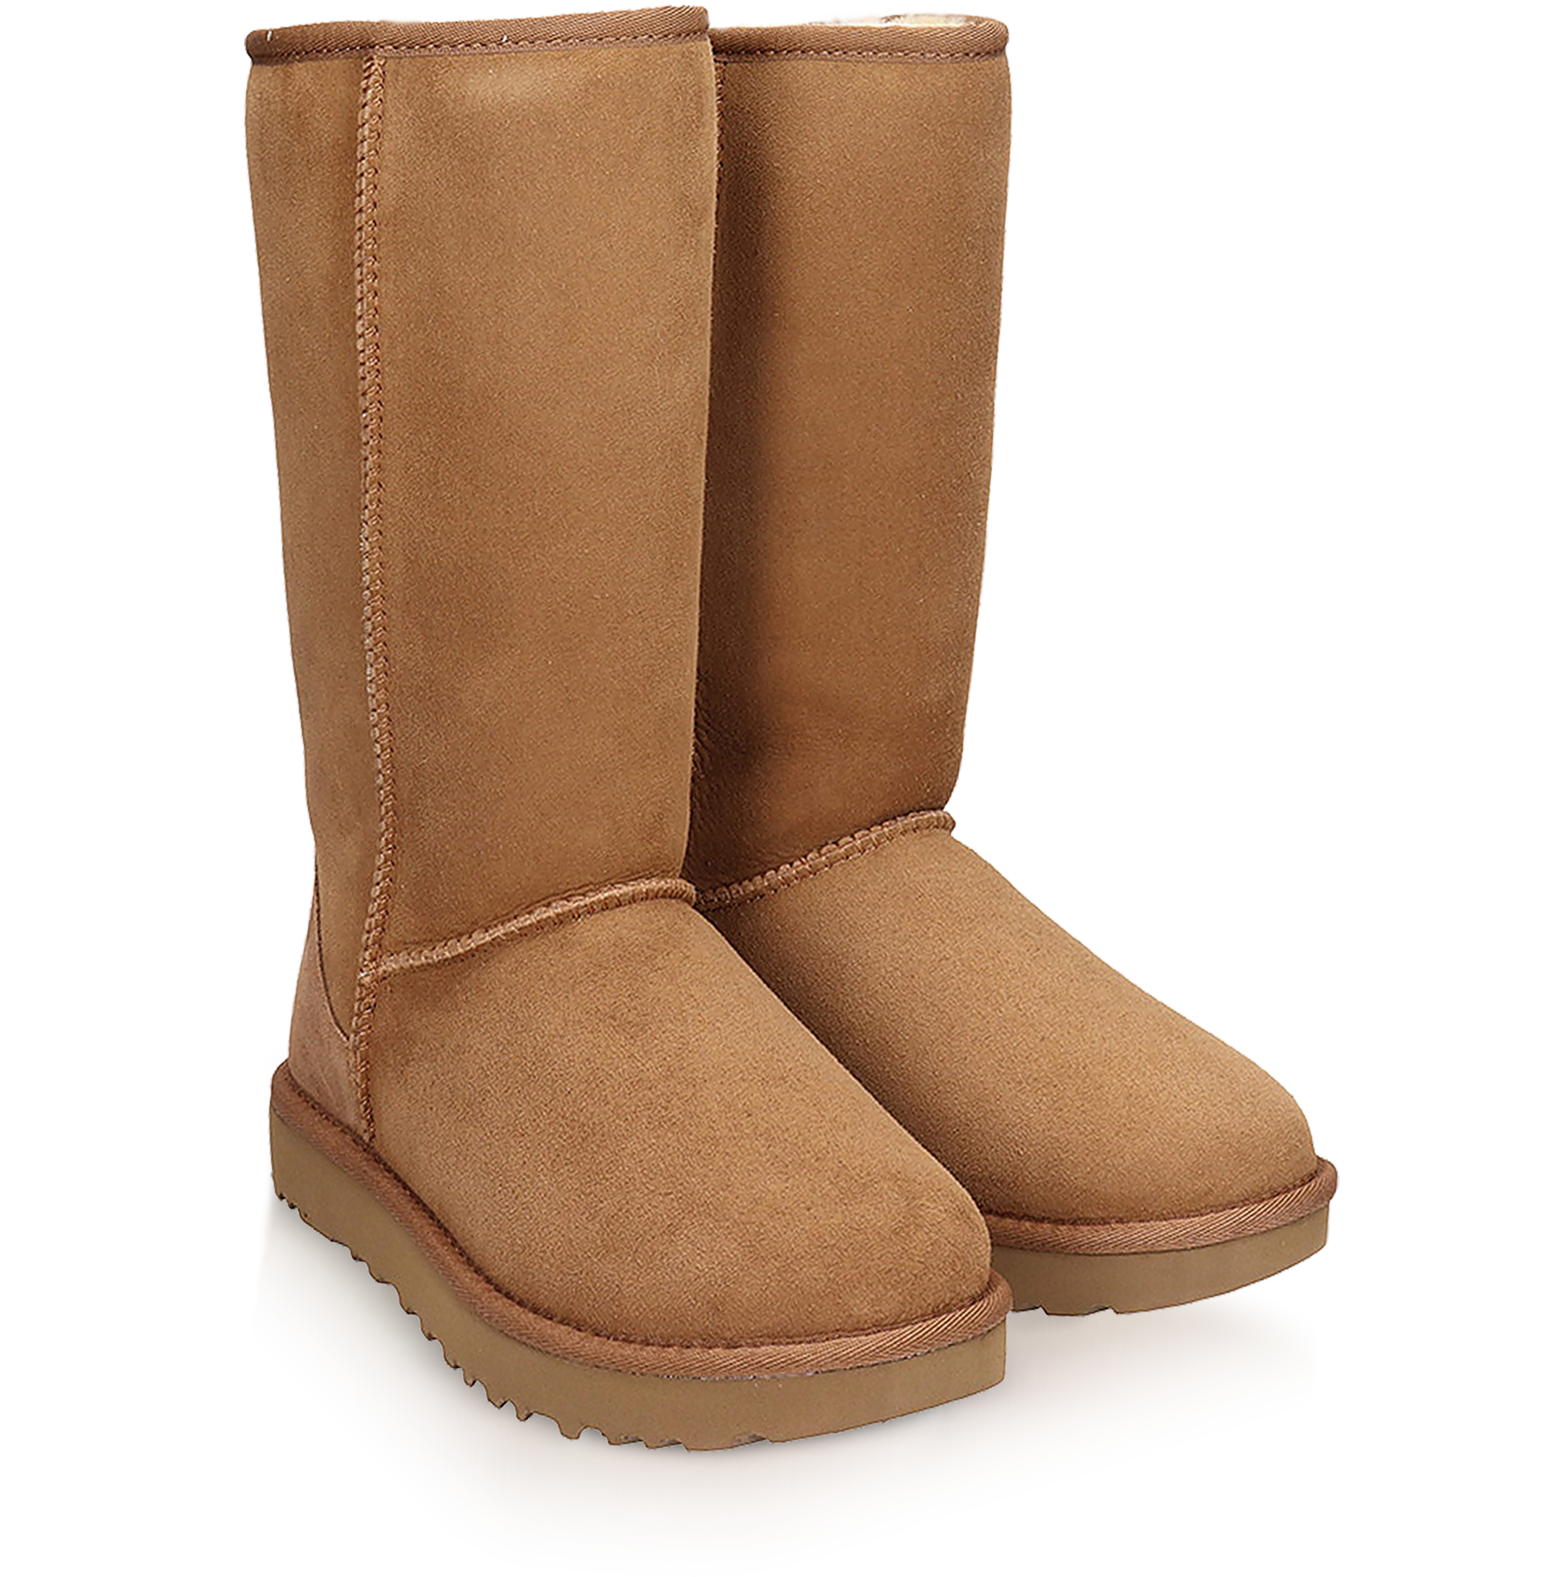 UGG Classic Tall Chestnut Boots 7 US 